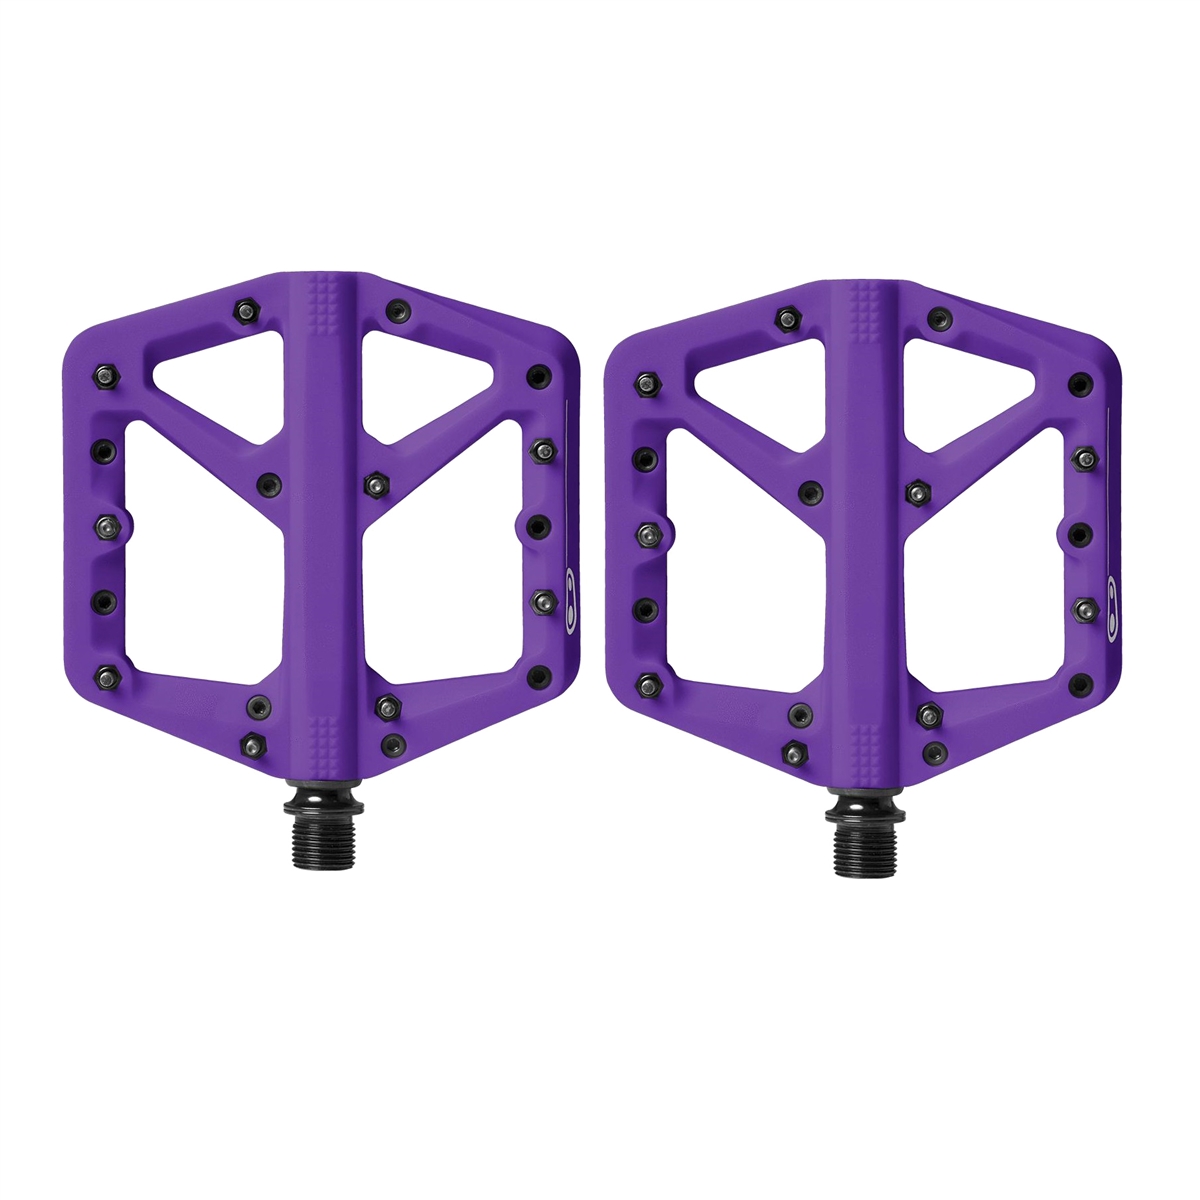 Pair of pedals Stamp 1 Large purple